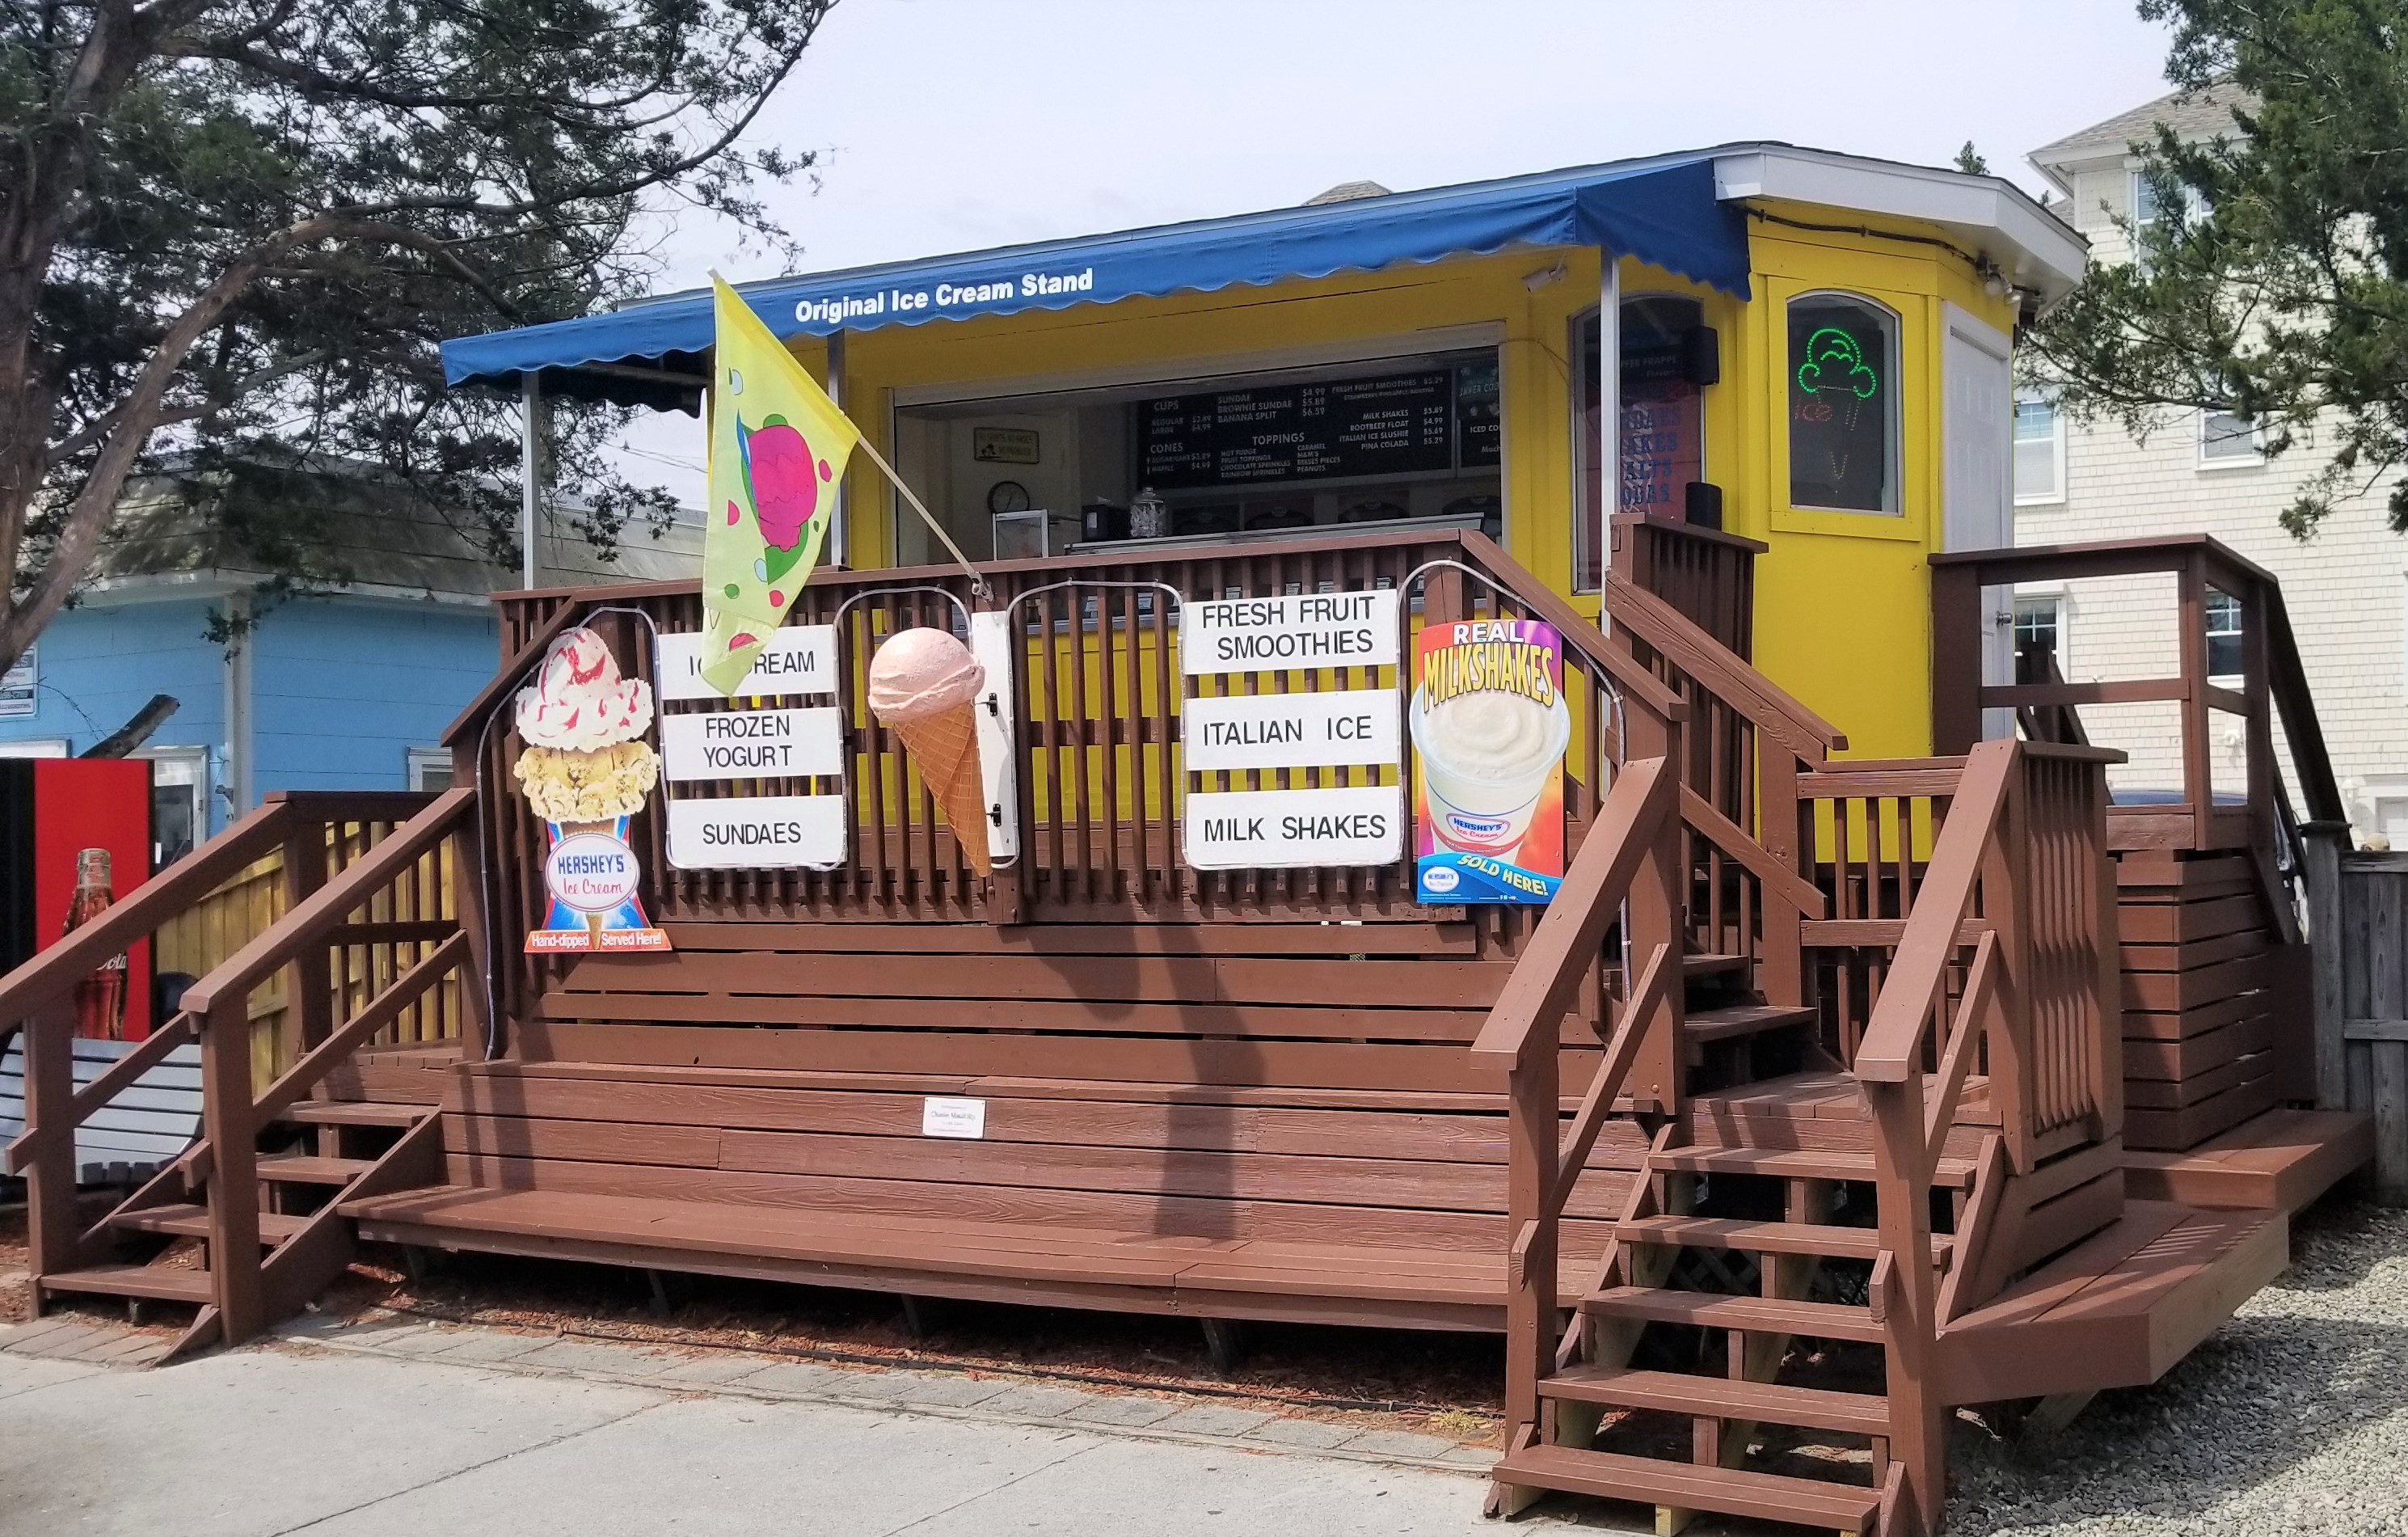 https://assets.simpleviewinc.com/simpleview/image/upload/crm/wilmingtonnc/The-Original-Ice-Cream-Stand-536b65cf5056a34_536b67bc-5056-a348-3acbeb06a11321bb.jpg